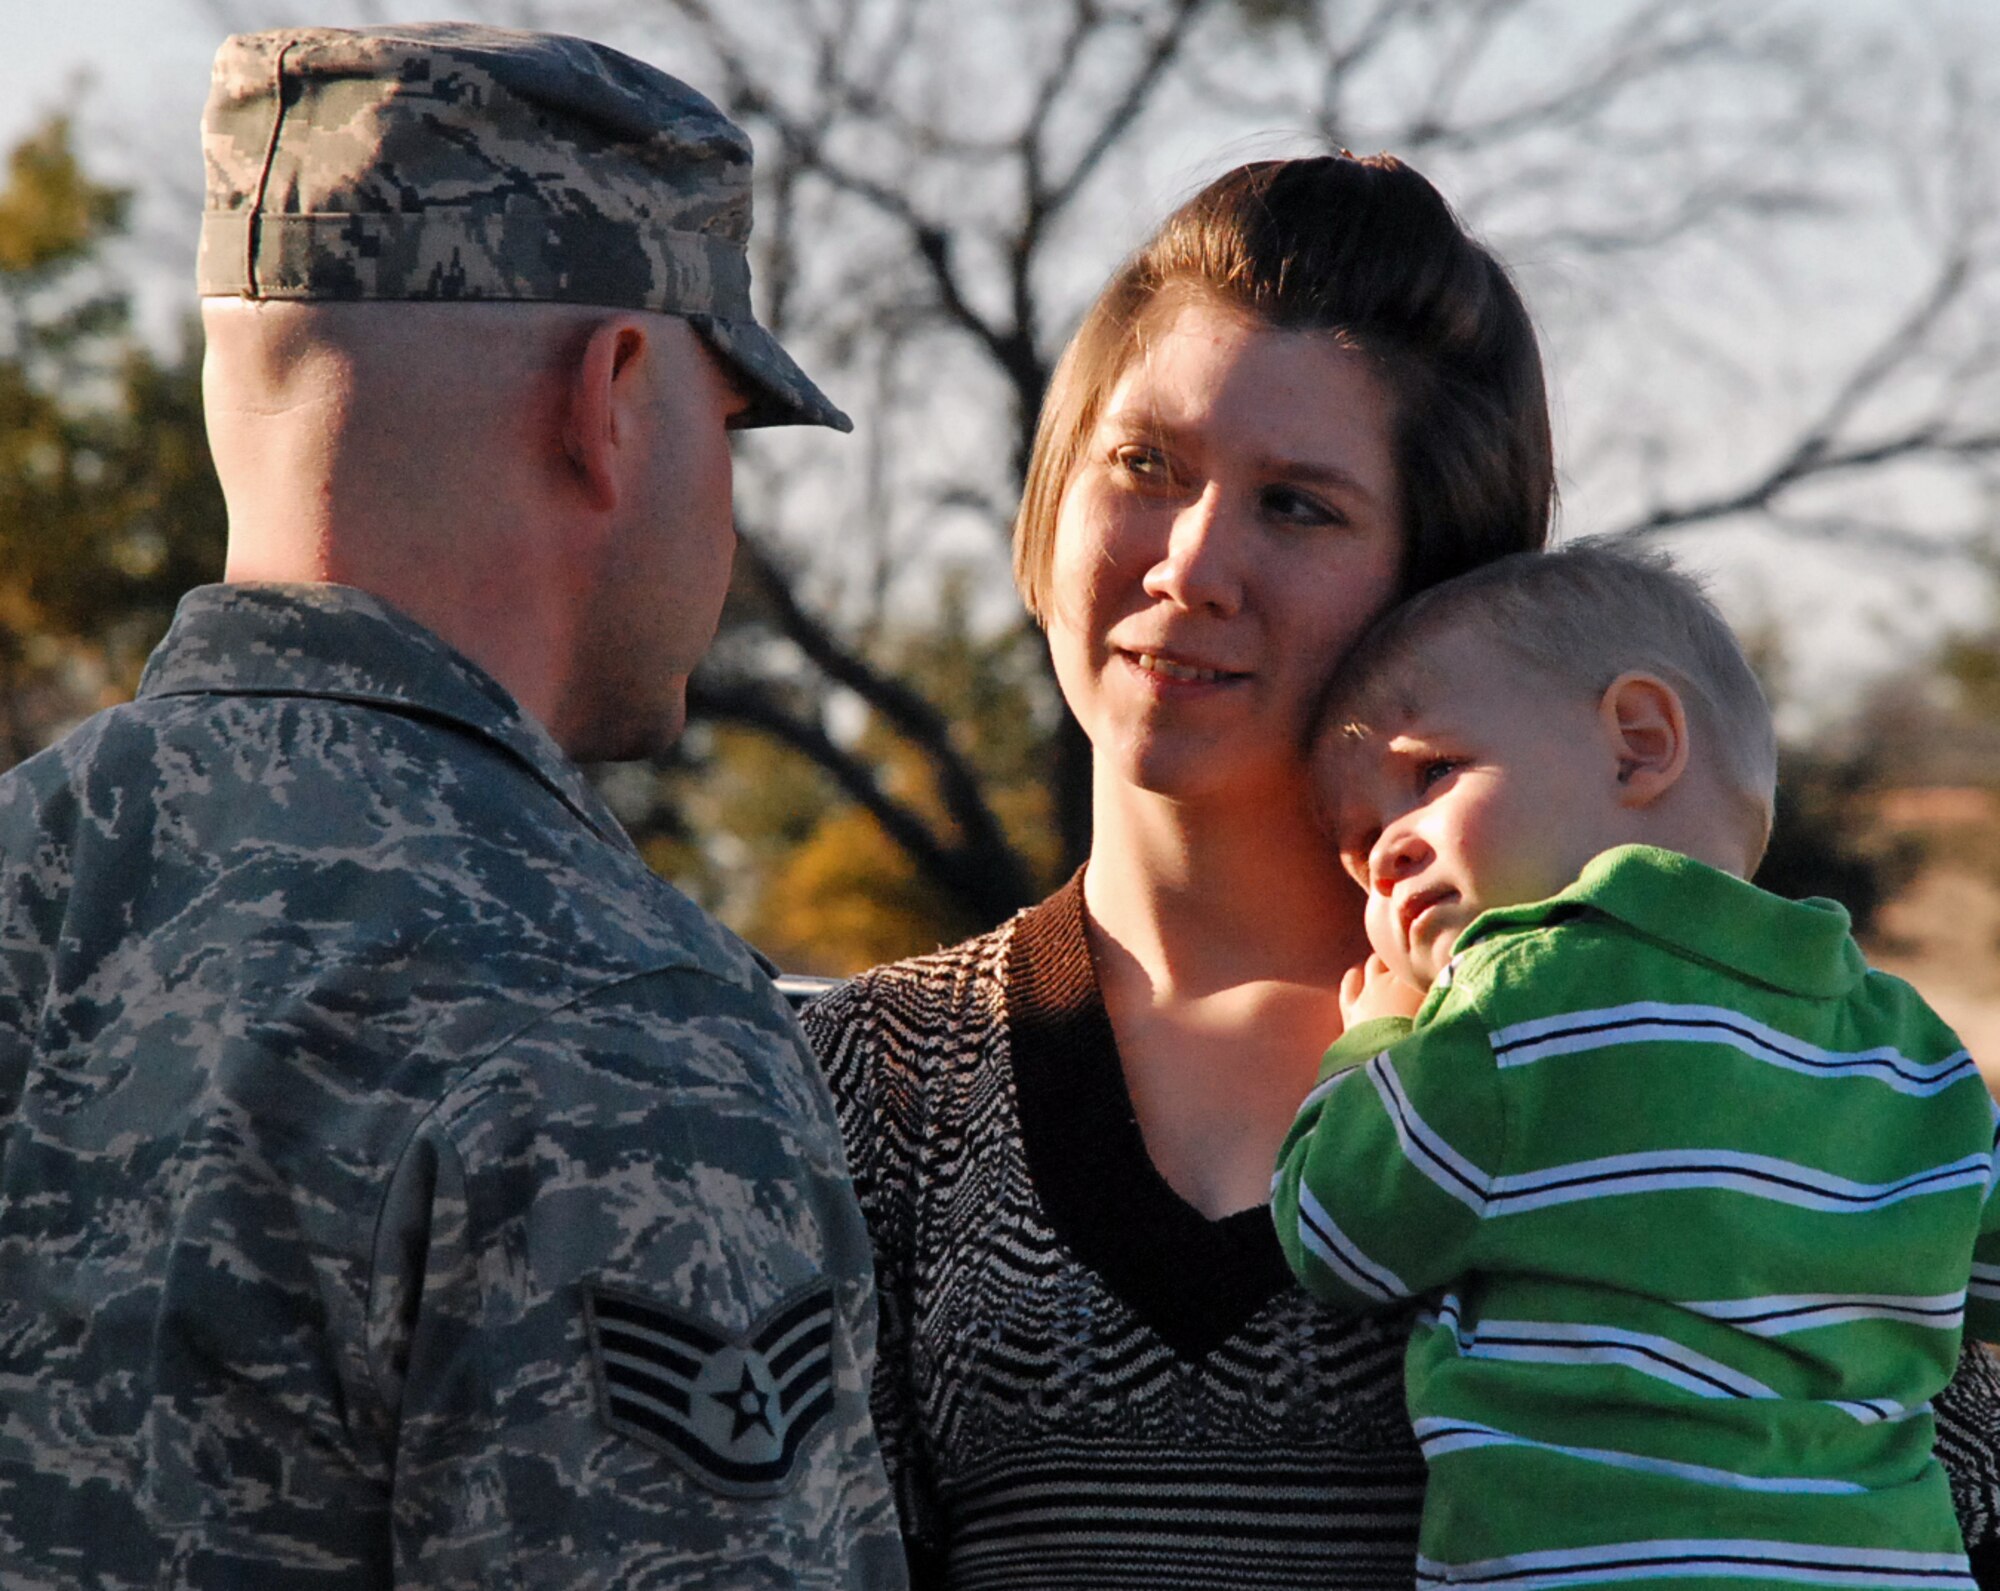 LAUGHLIN AIR FORCE BASE, Texas – Staff Sgt. John Major, 47th Force Support Squadron, is welcomed home by his wife Jennifer and one-year-old son Michael after a four month deployment with several other Airmen here Jan. 28. (U.S. Air Force photo by Airman 1st Class Sara Csurilla)